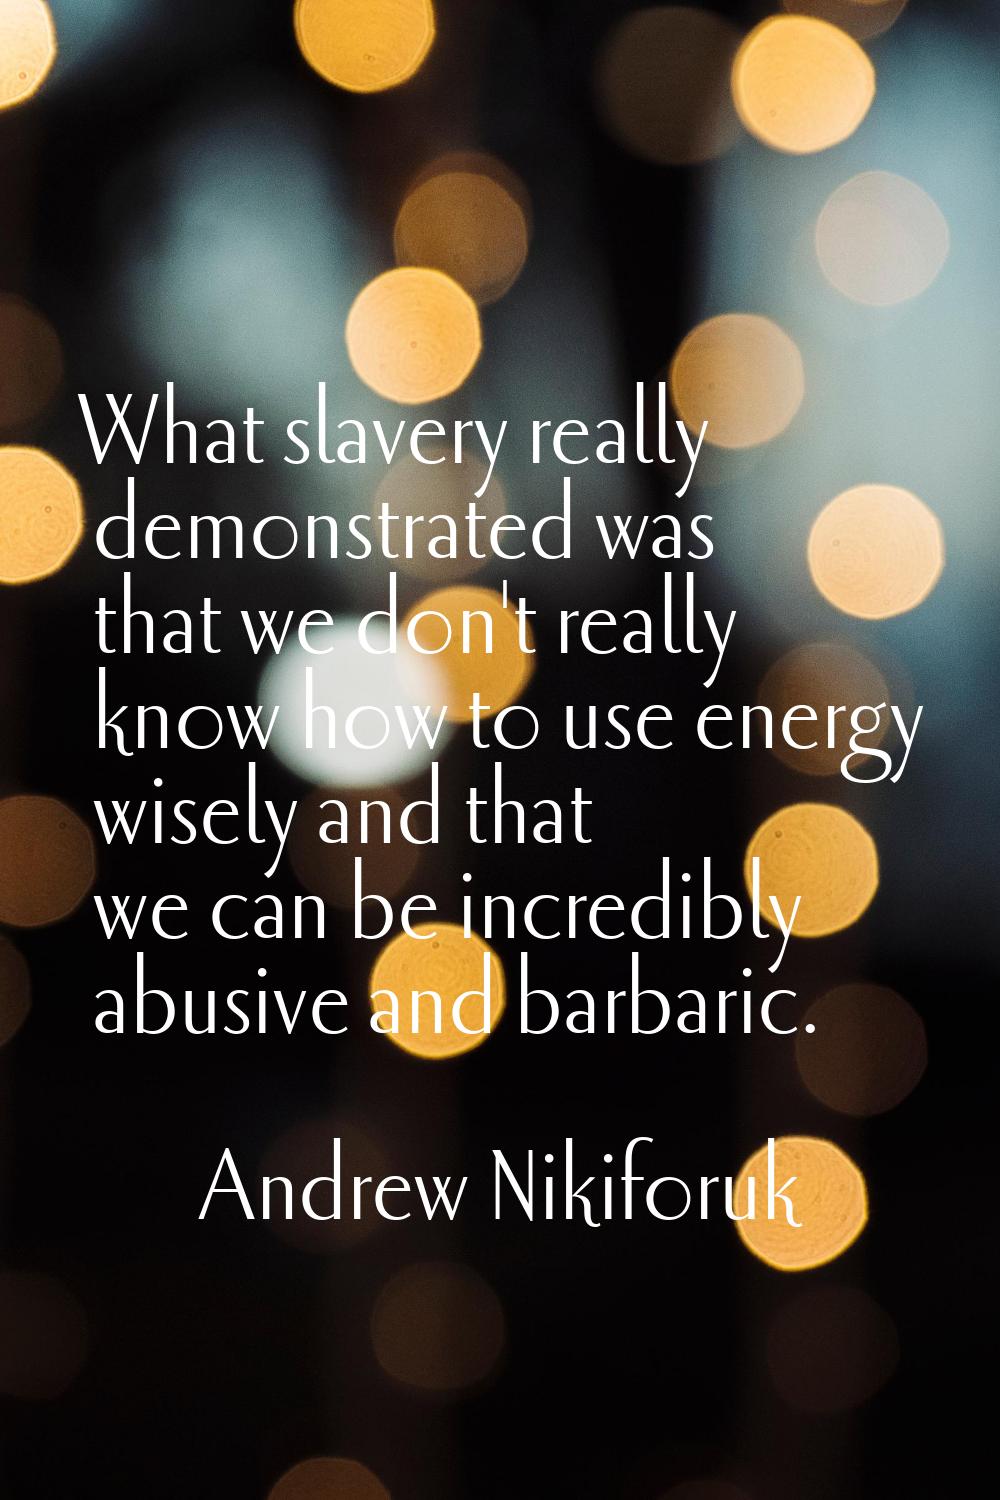 What slavery really demonstrated was that we don't really know how to use energy wisely and that we